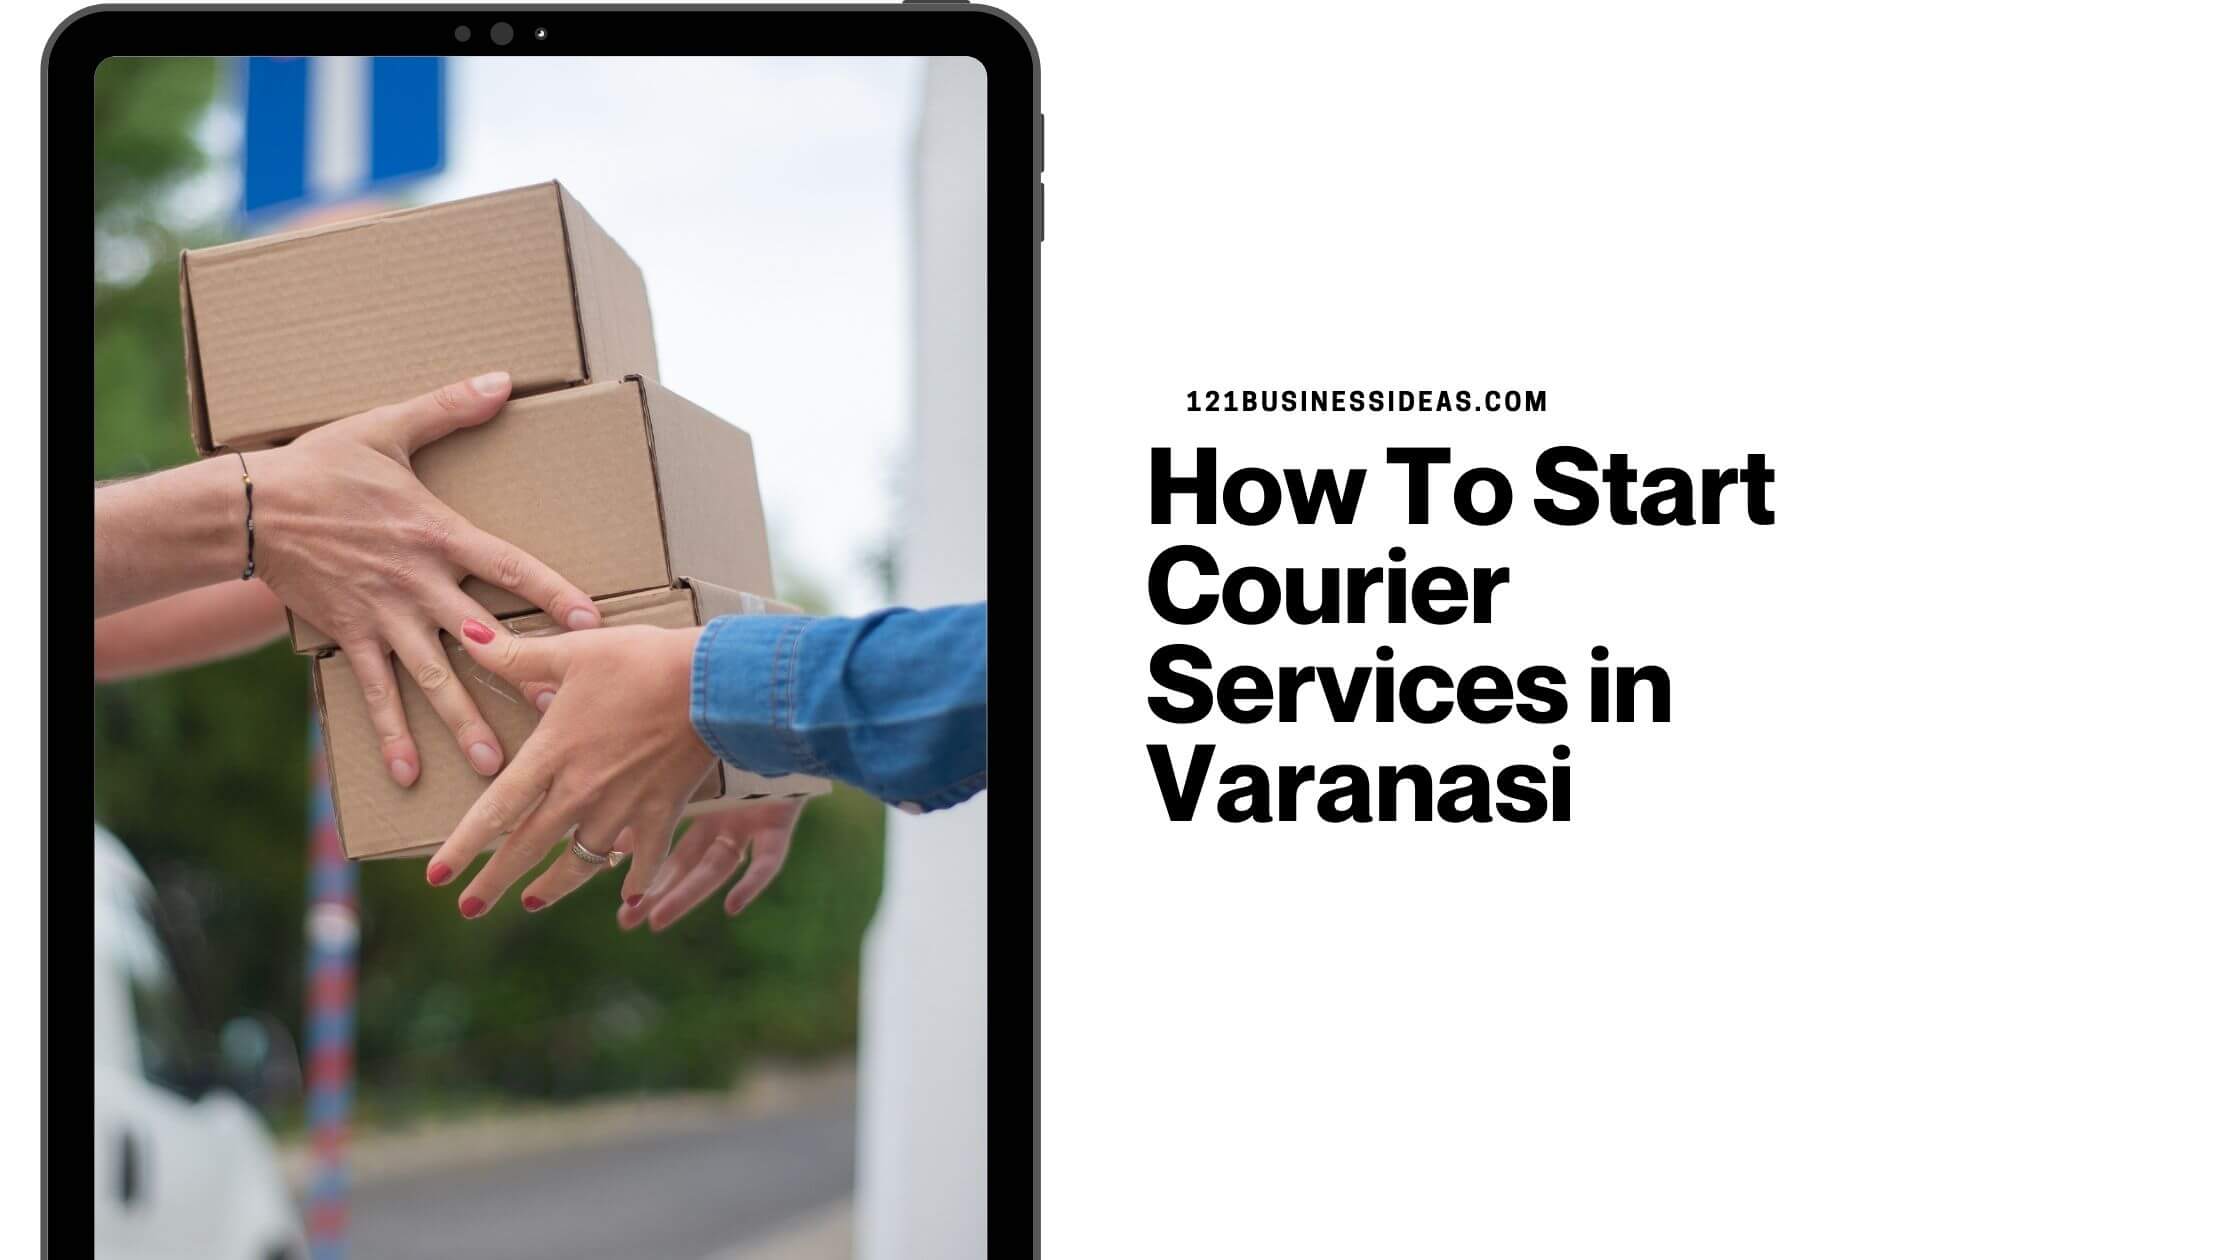 How To Start Courier Services in Varanasi (1)